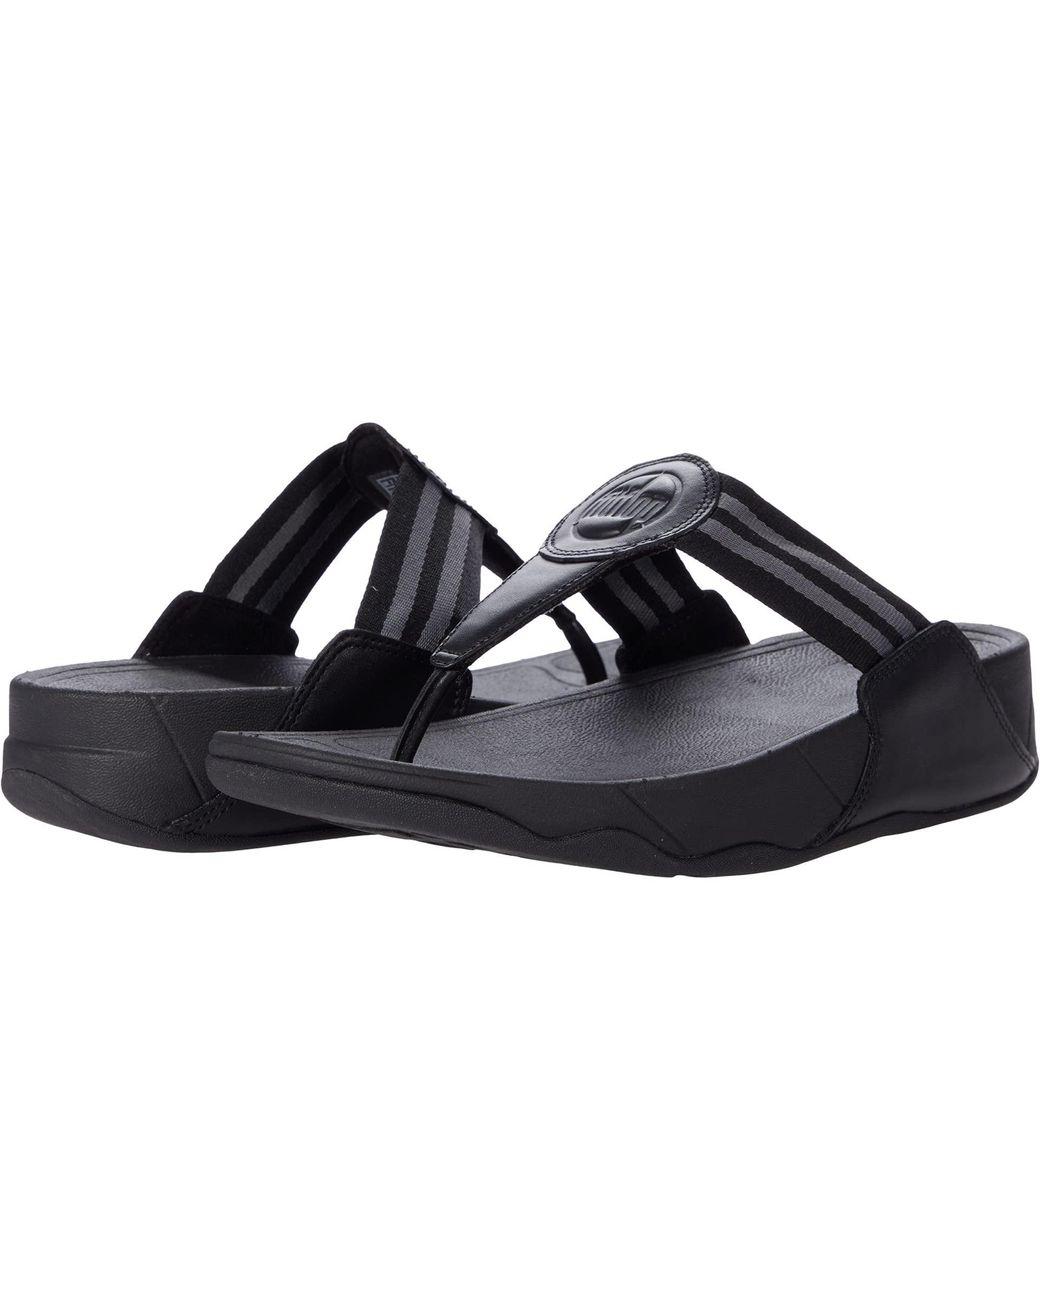 Fitflop Synthetic Walkstar Toe-post Sandals in Black - Lyst